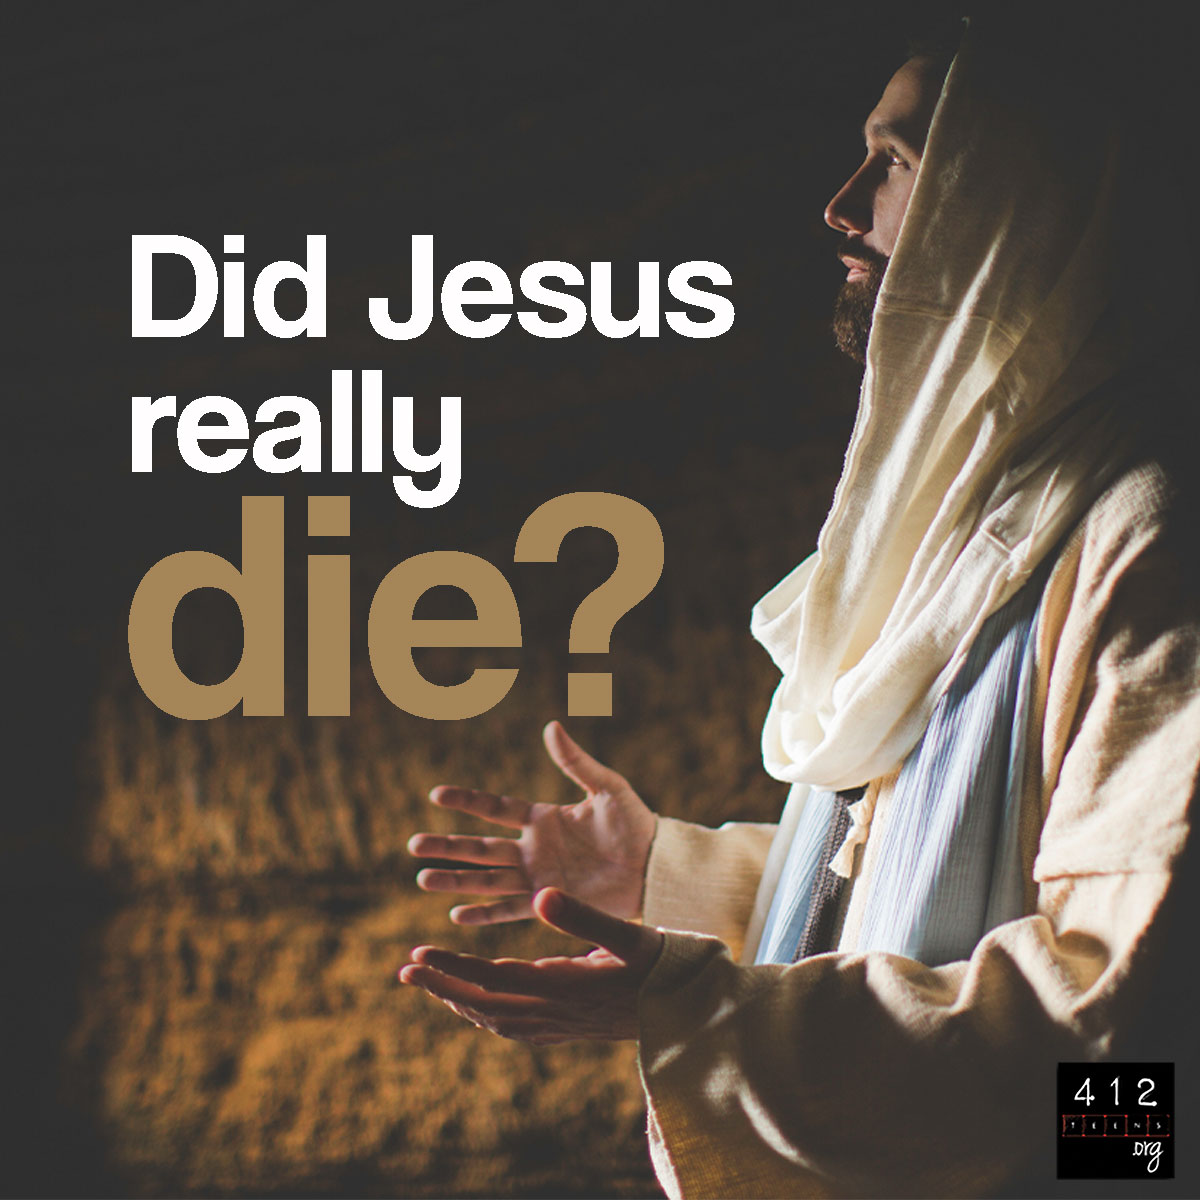 Where was Jesus for the three days between His death and resurrection?